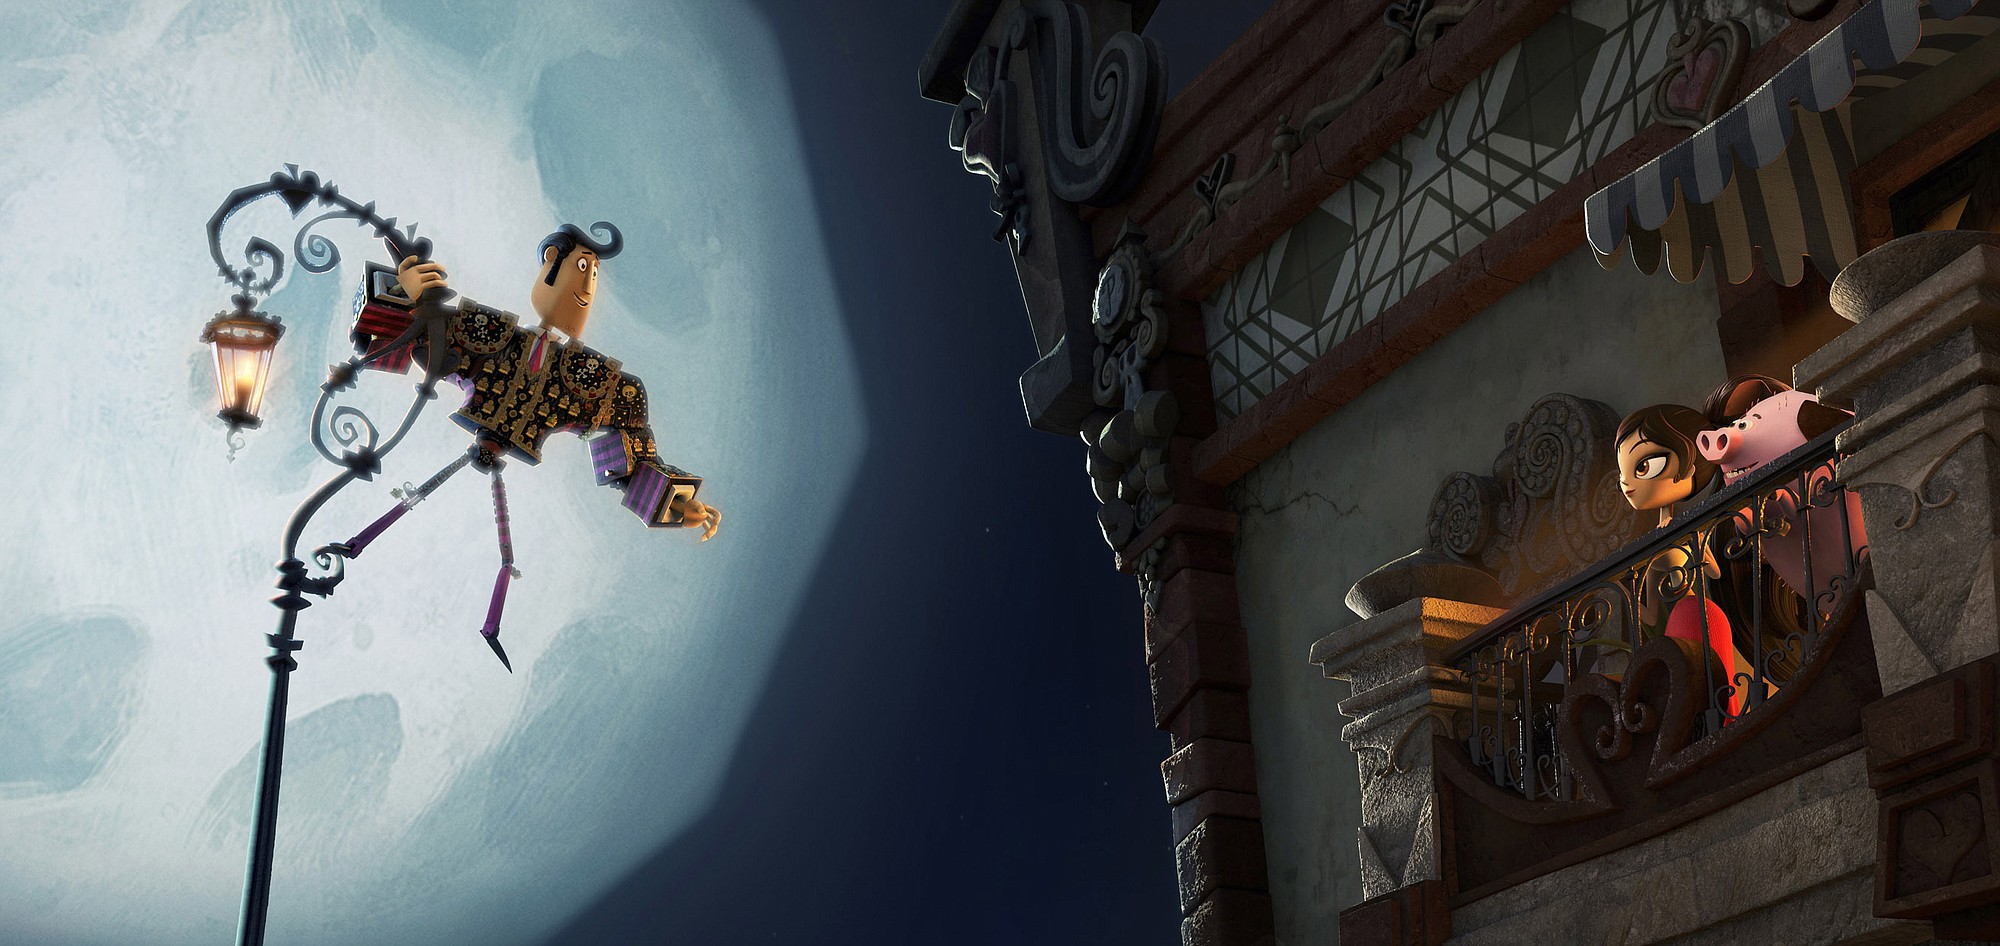 The character Manolo, voiced by Diego Luna, left, and the character Maria, voiced by Zoe Saldana, in a scene from &quot;The Book of Life.&quot;